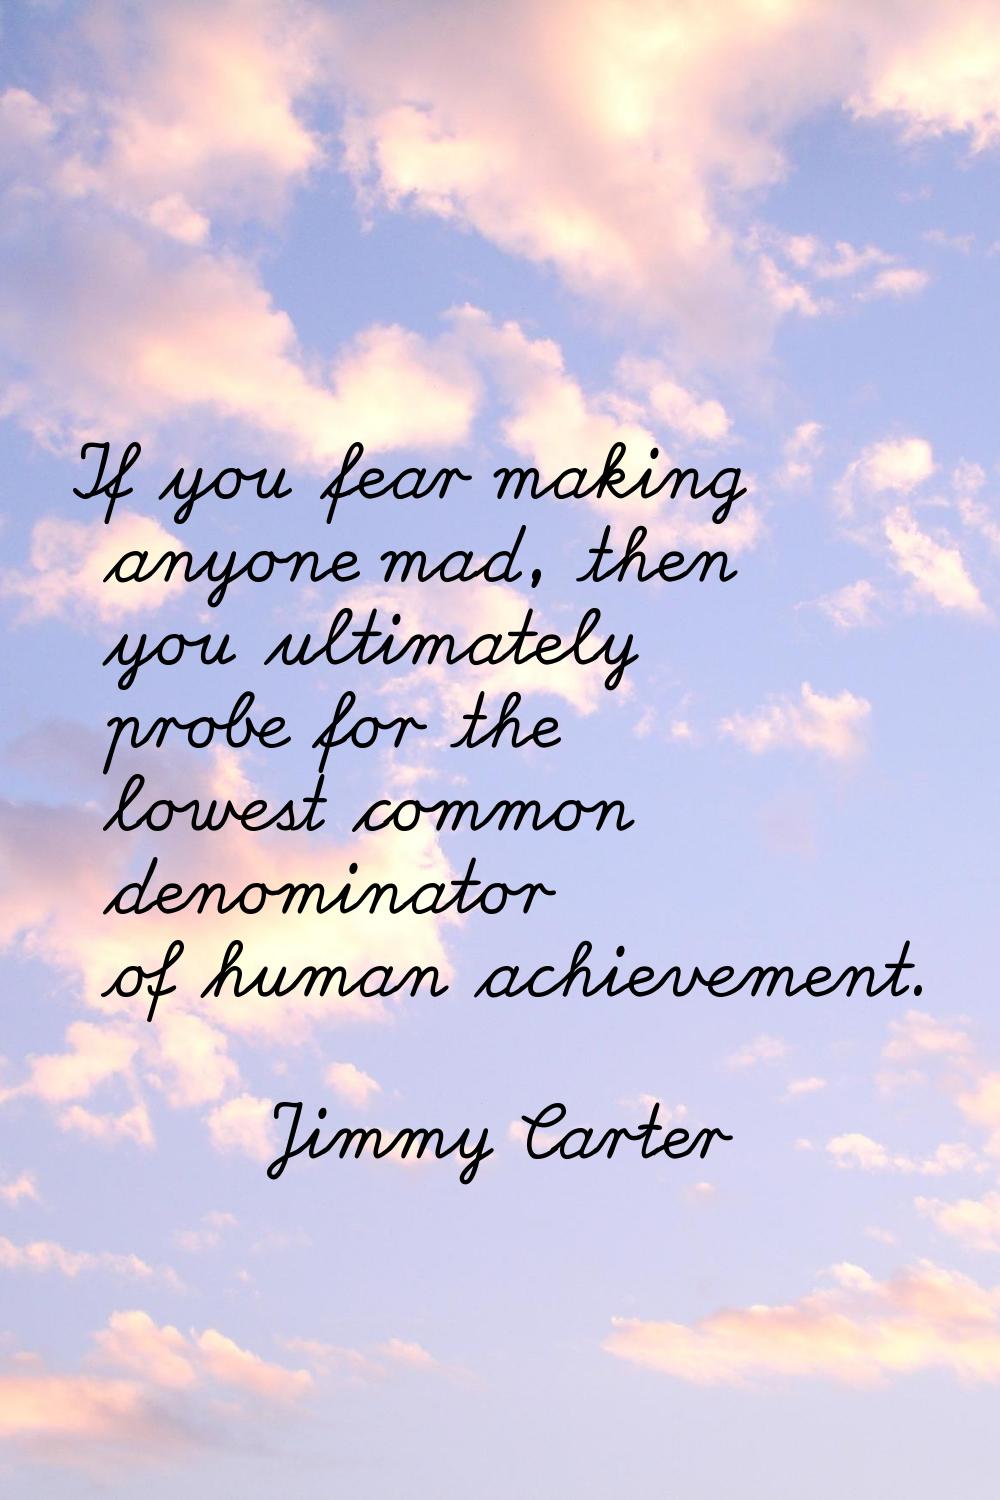 If you fear making anyone mad, then you ultimately probe for the lowest common denominator of human